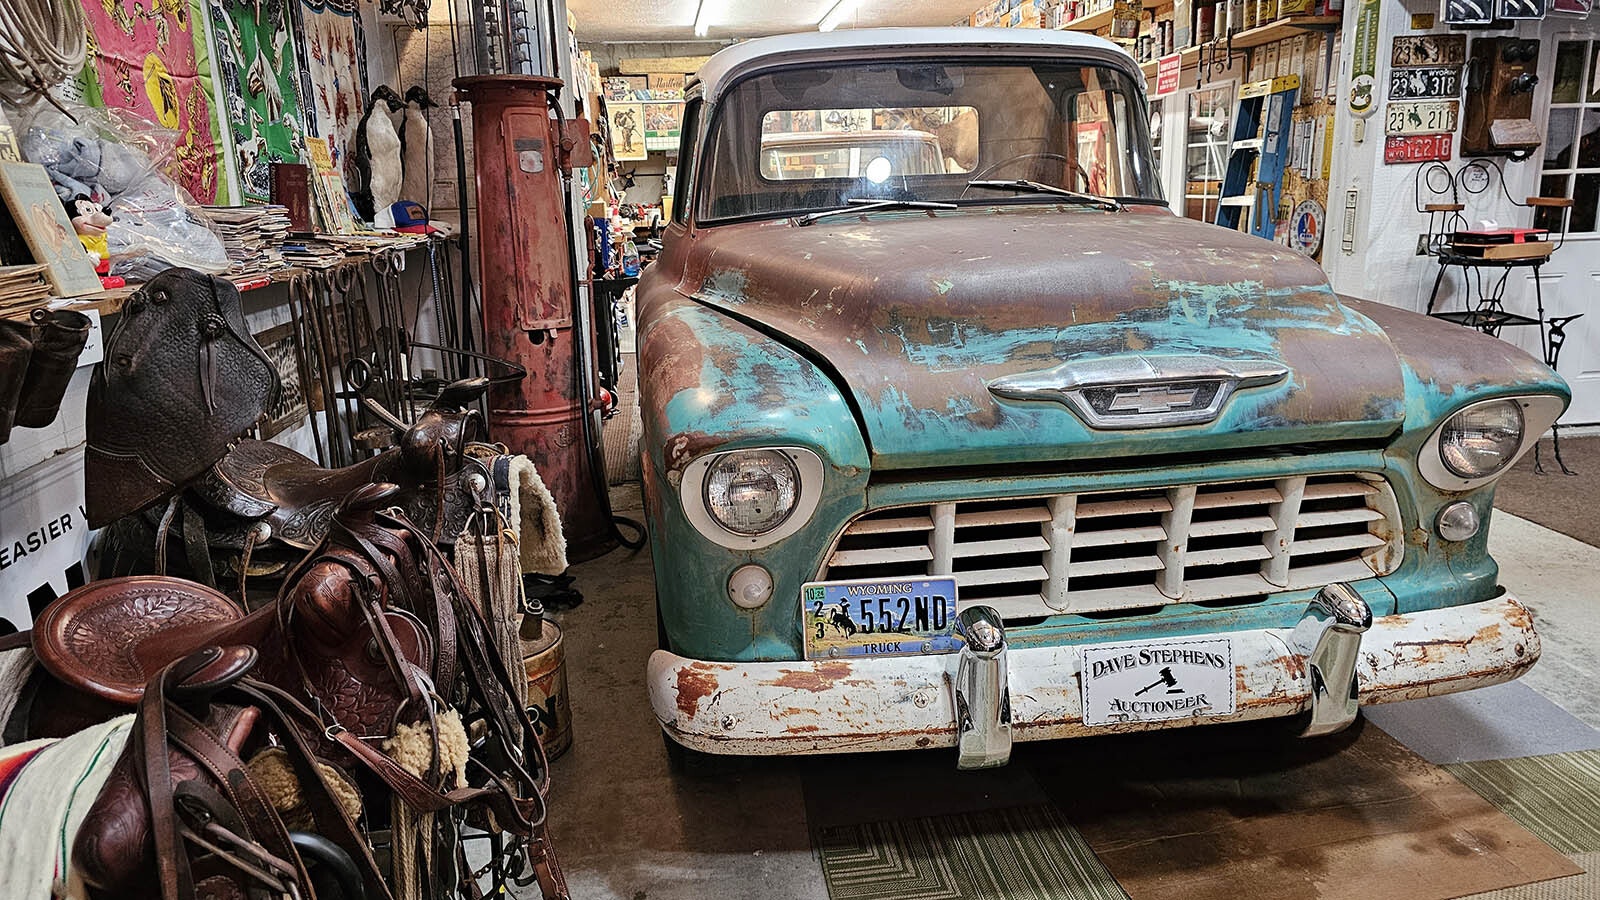 Yet another vintage truck in Dave Stephens' collection. At left, a row of saddles, and in the far corner an old-style gasoline pump.